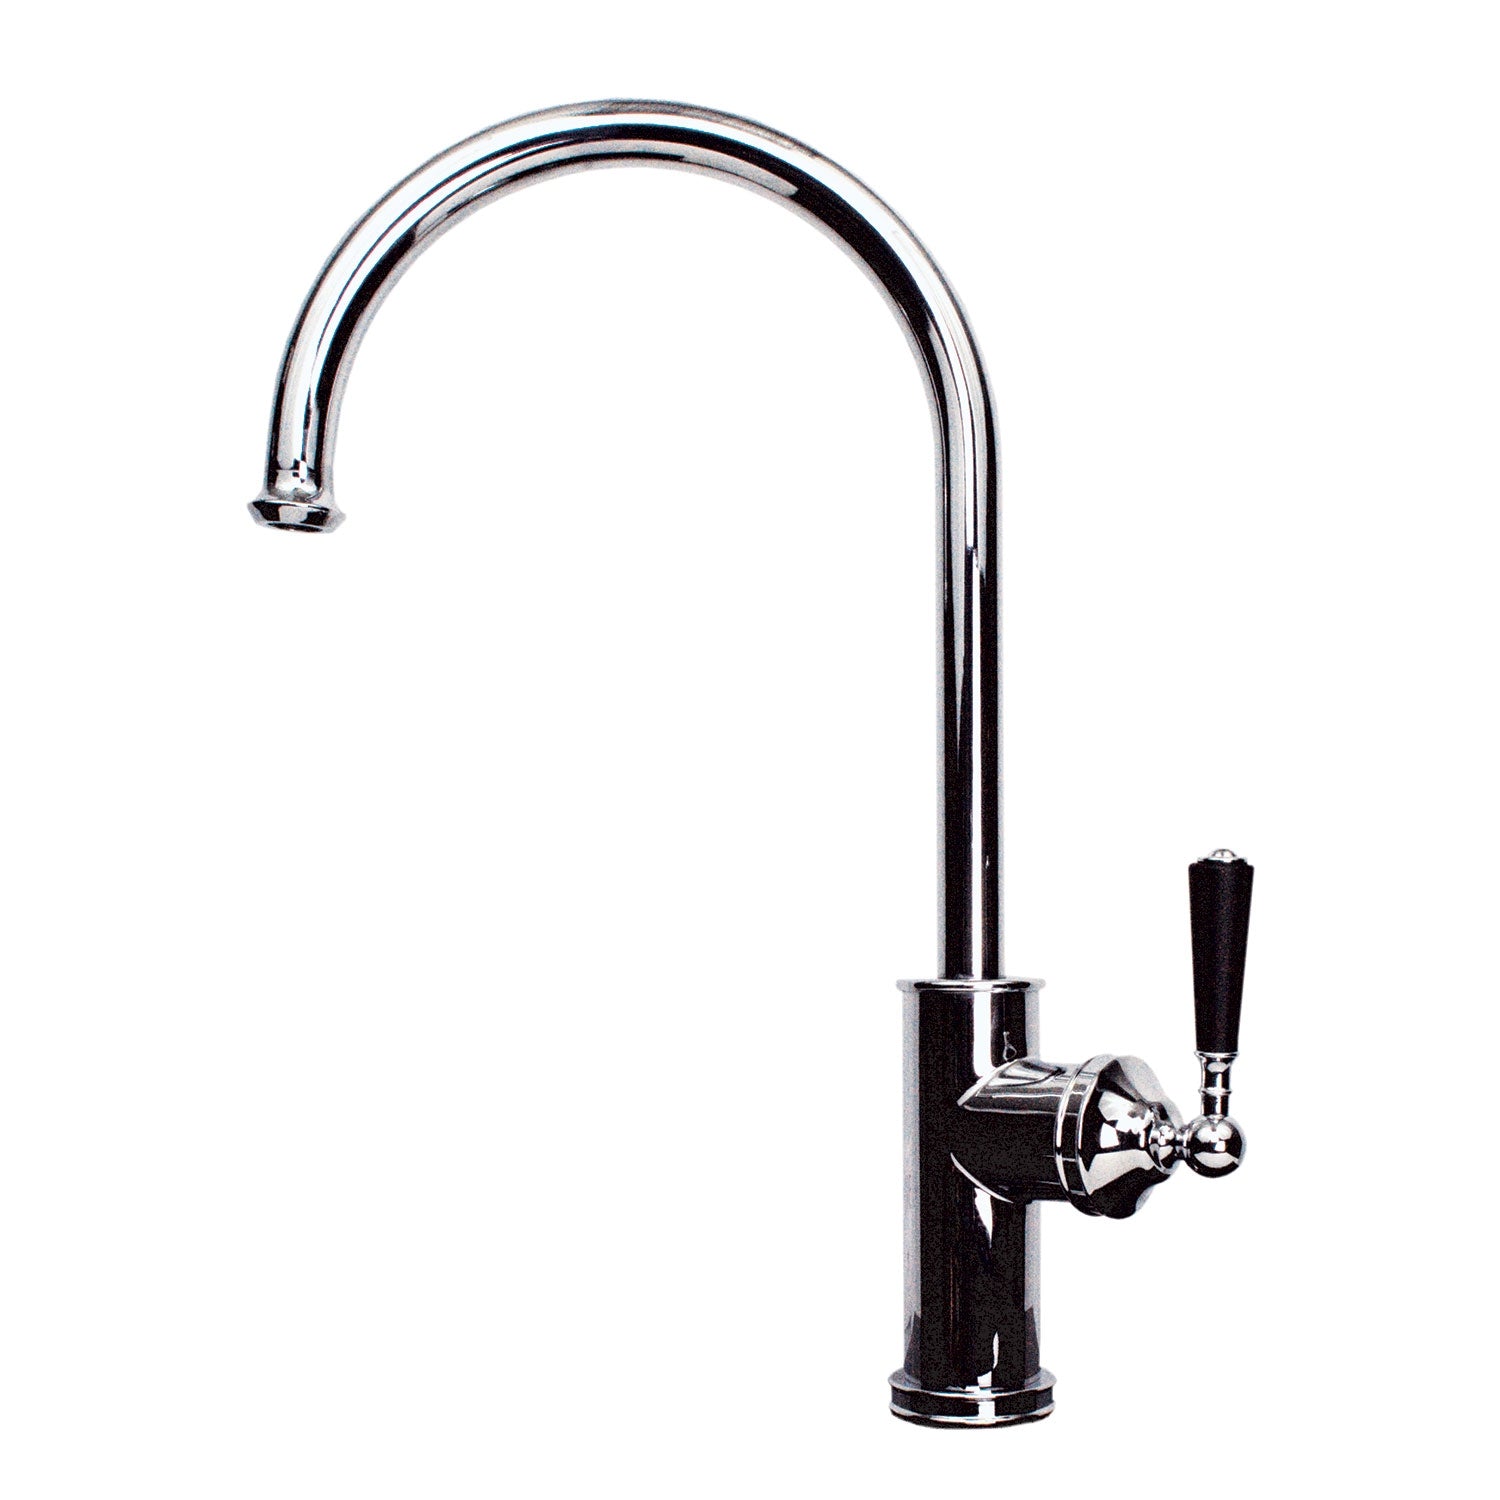 Swivel Single Handle Kitchen Faucet in Polished Chrome – Emory & Bond